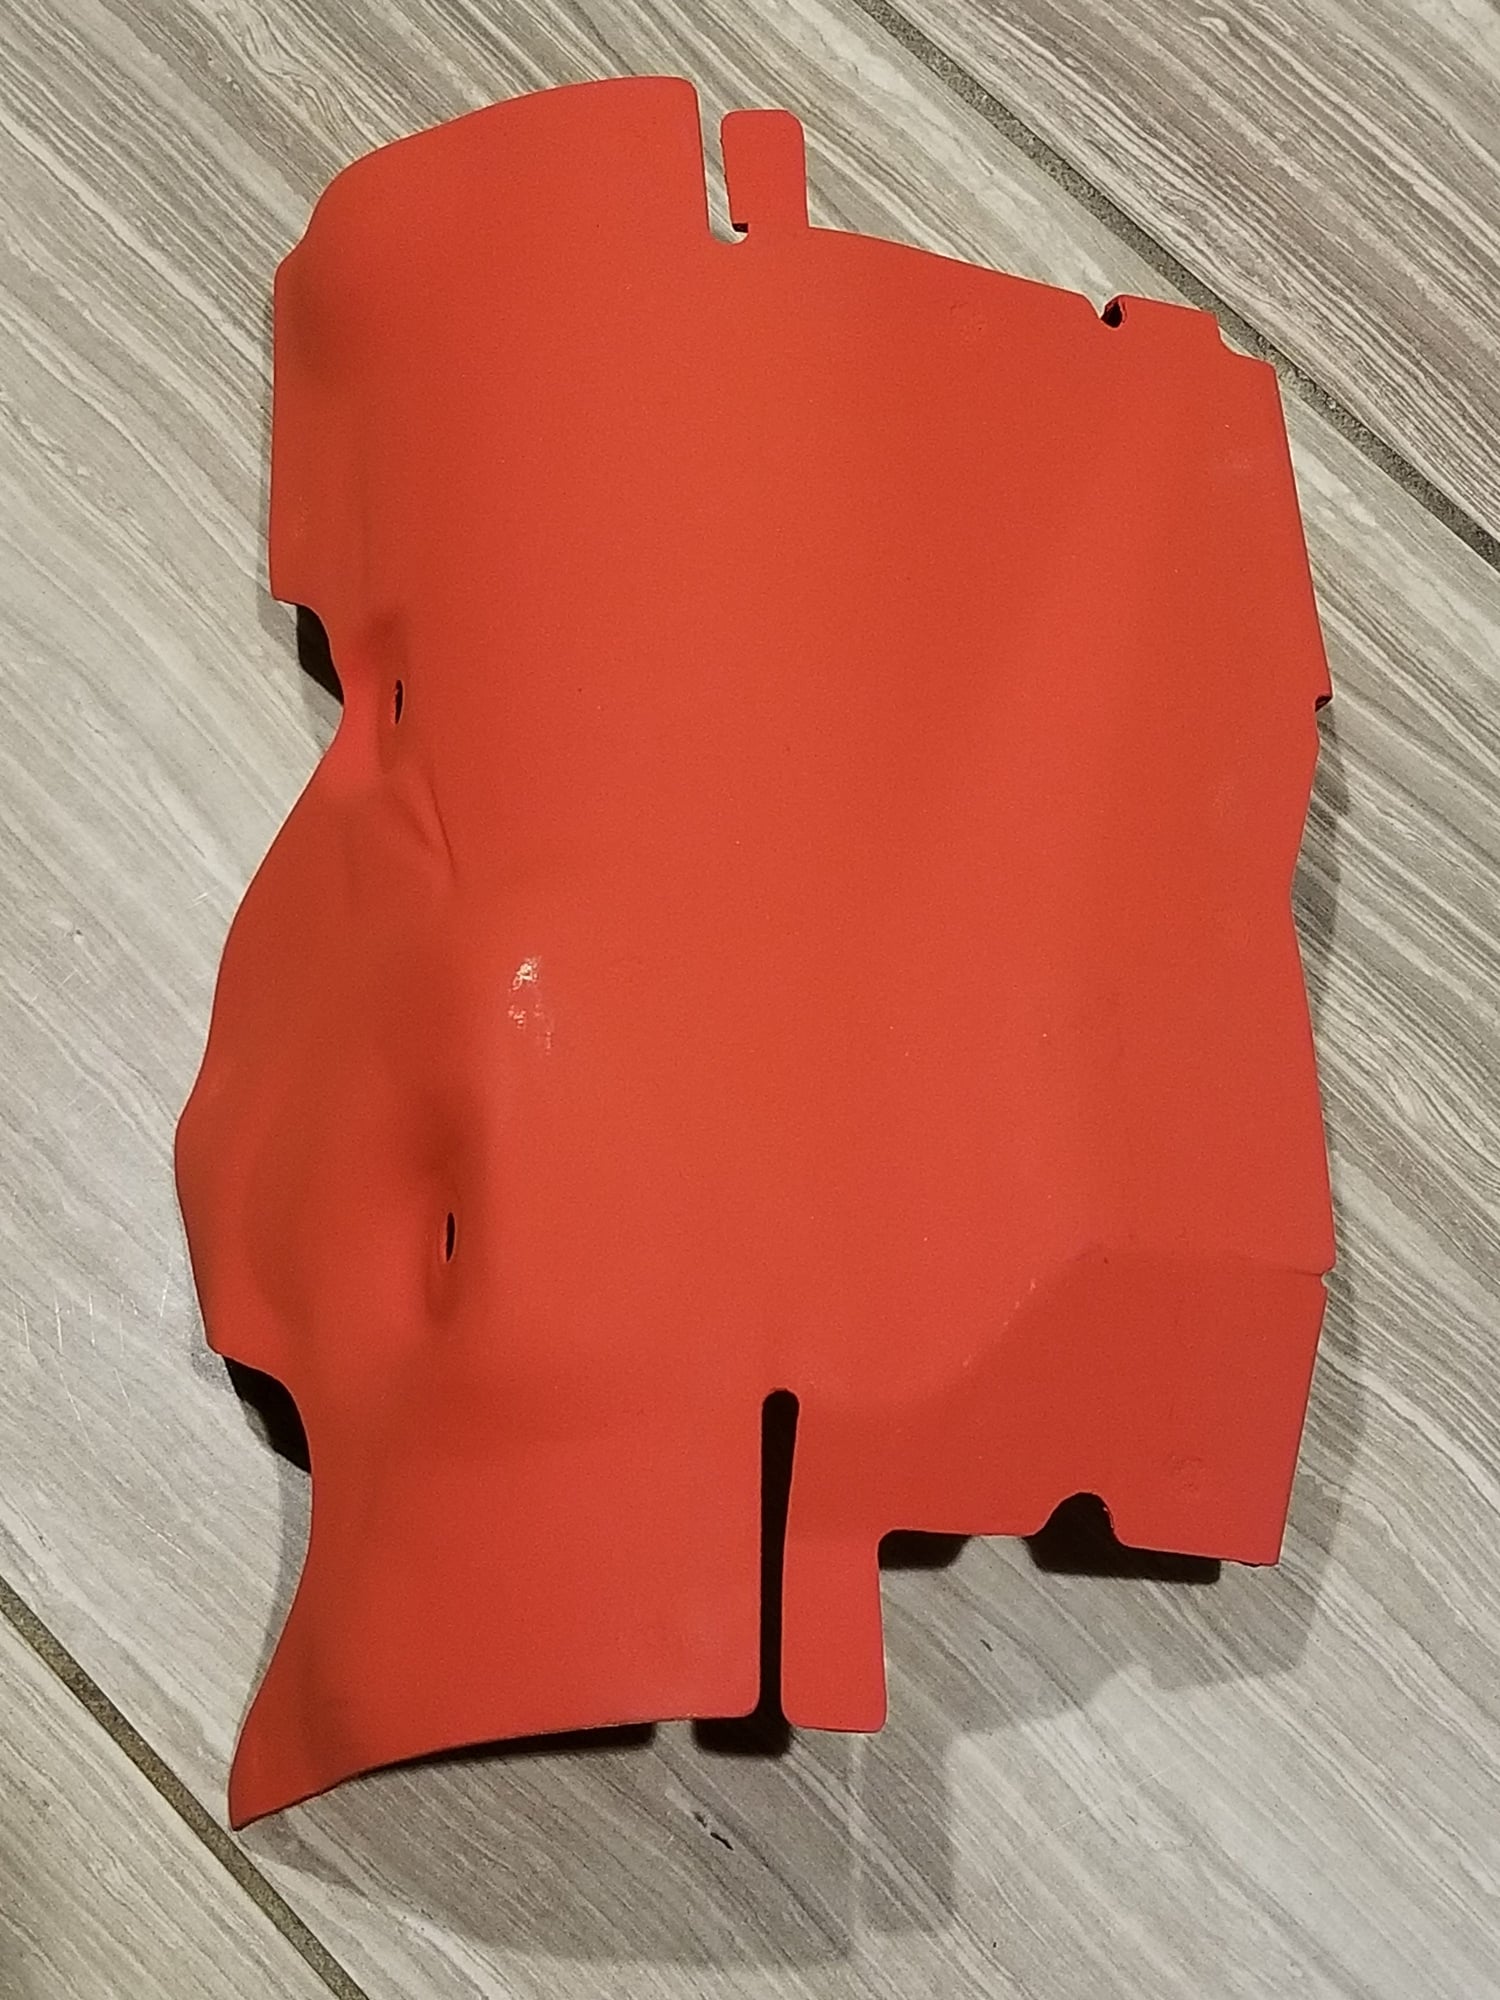 Engine - Intake/Fuel - FD3S Steel Heat Barrier Shield for OEM Twin Turbo Assembly - Used - 1993 to 2002 Mazda RX-7 - Toronto, ON M9A3G2, Canada